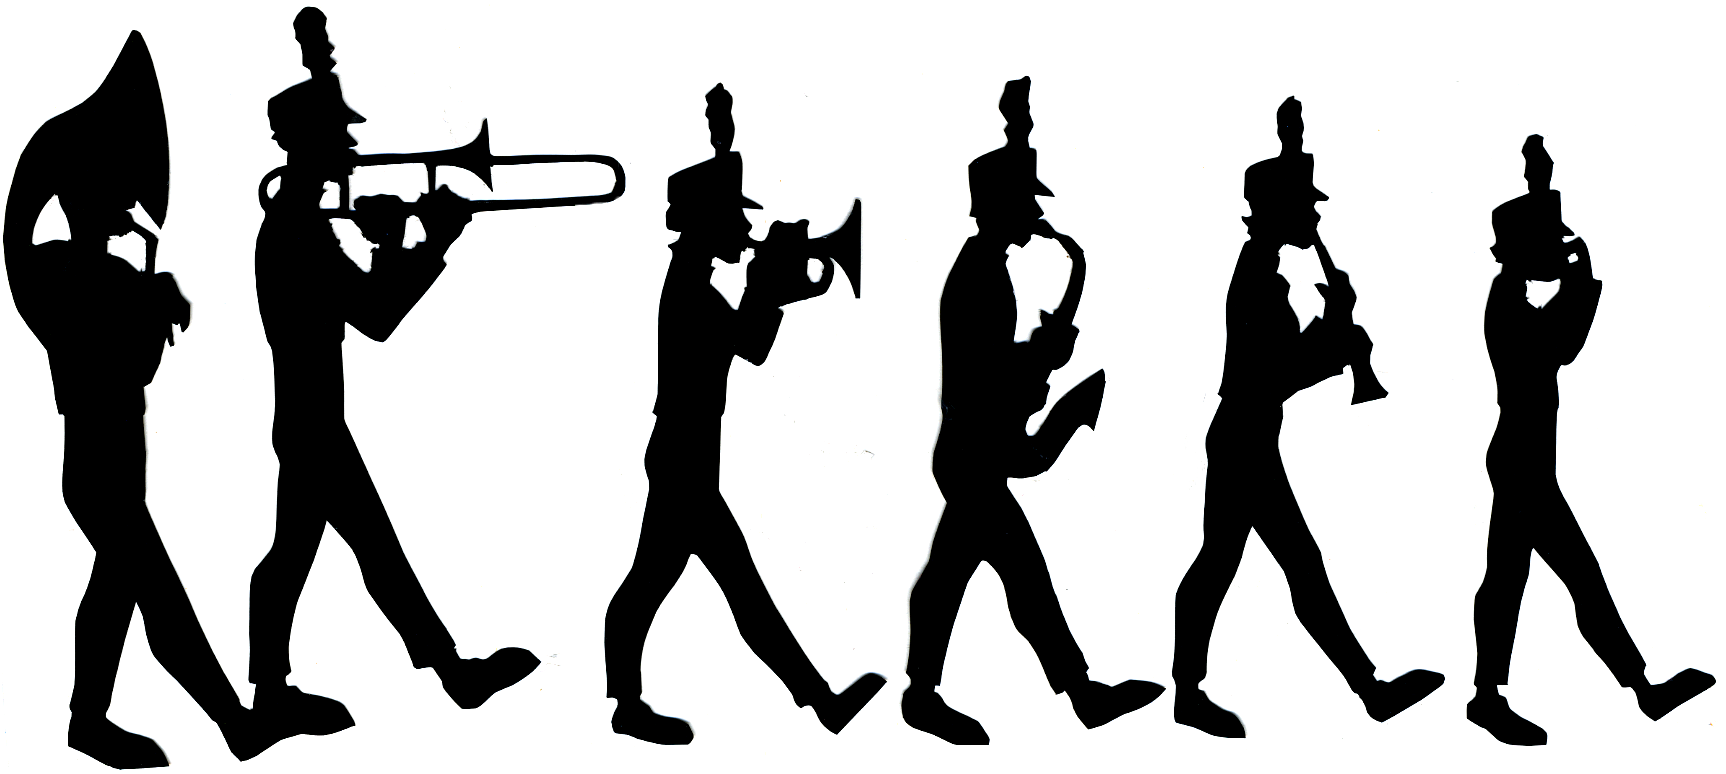 Marching Band Clipart & Marching Band Clip Art Images.